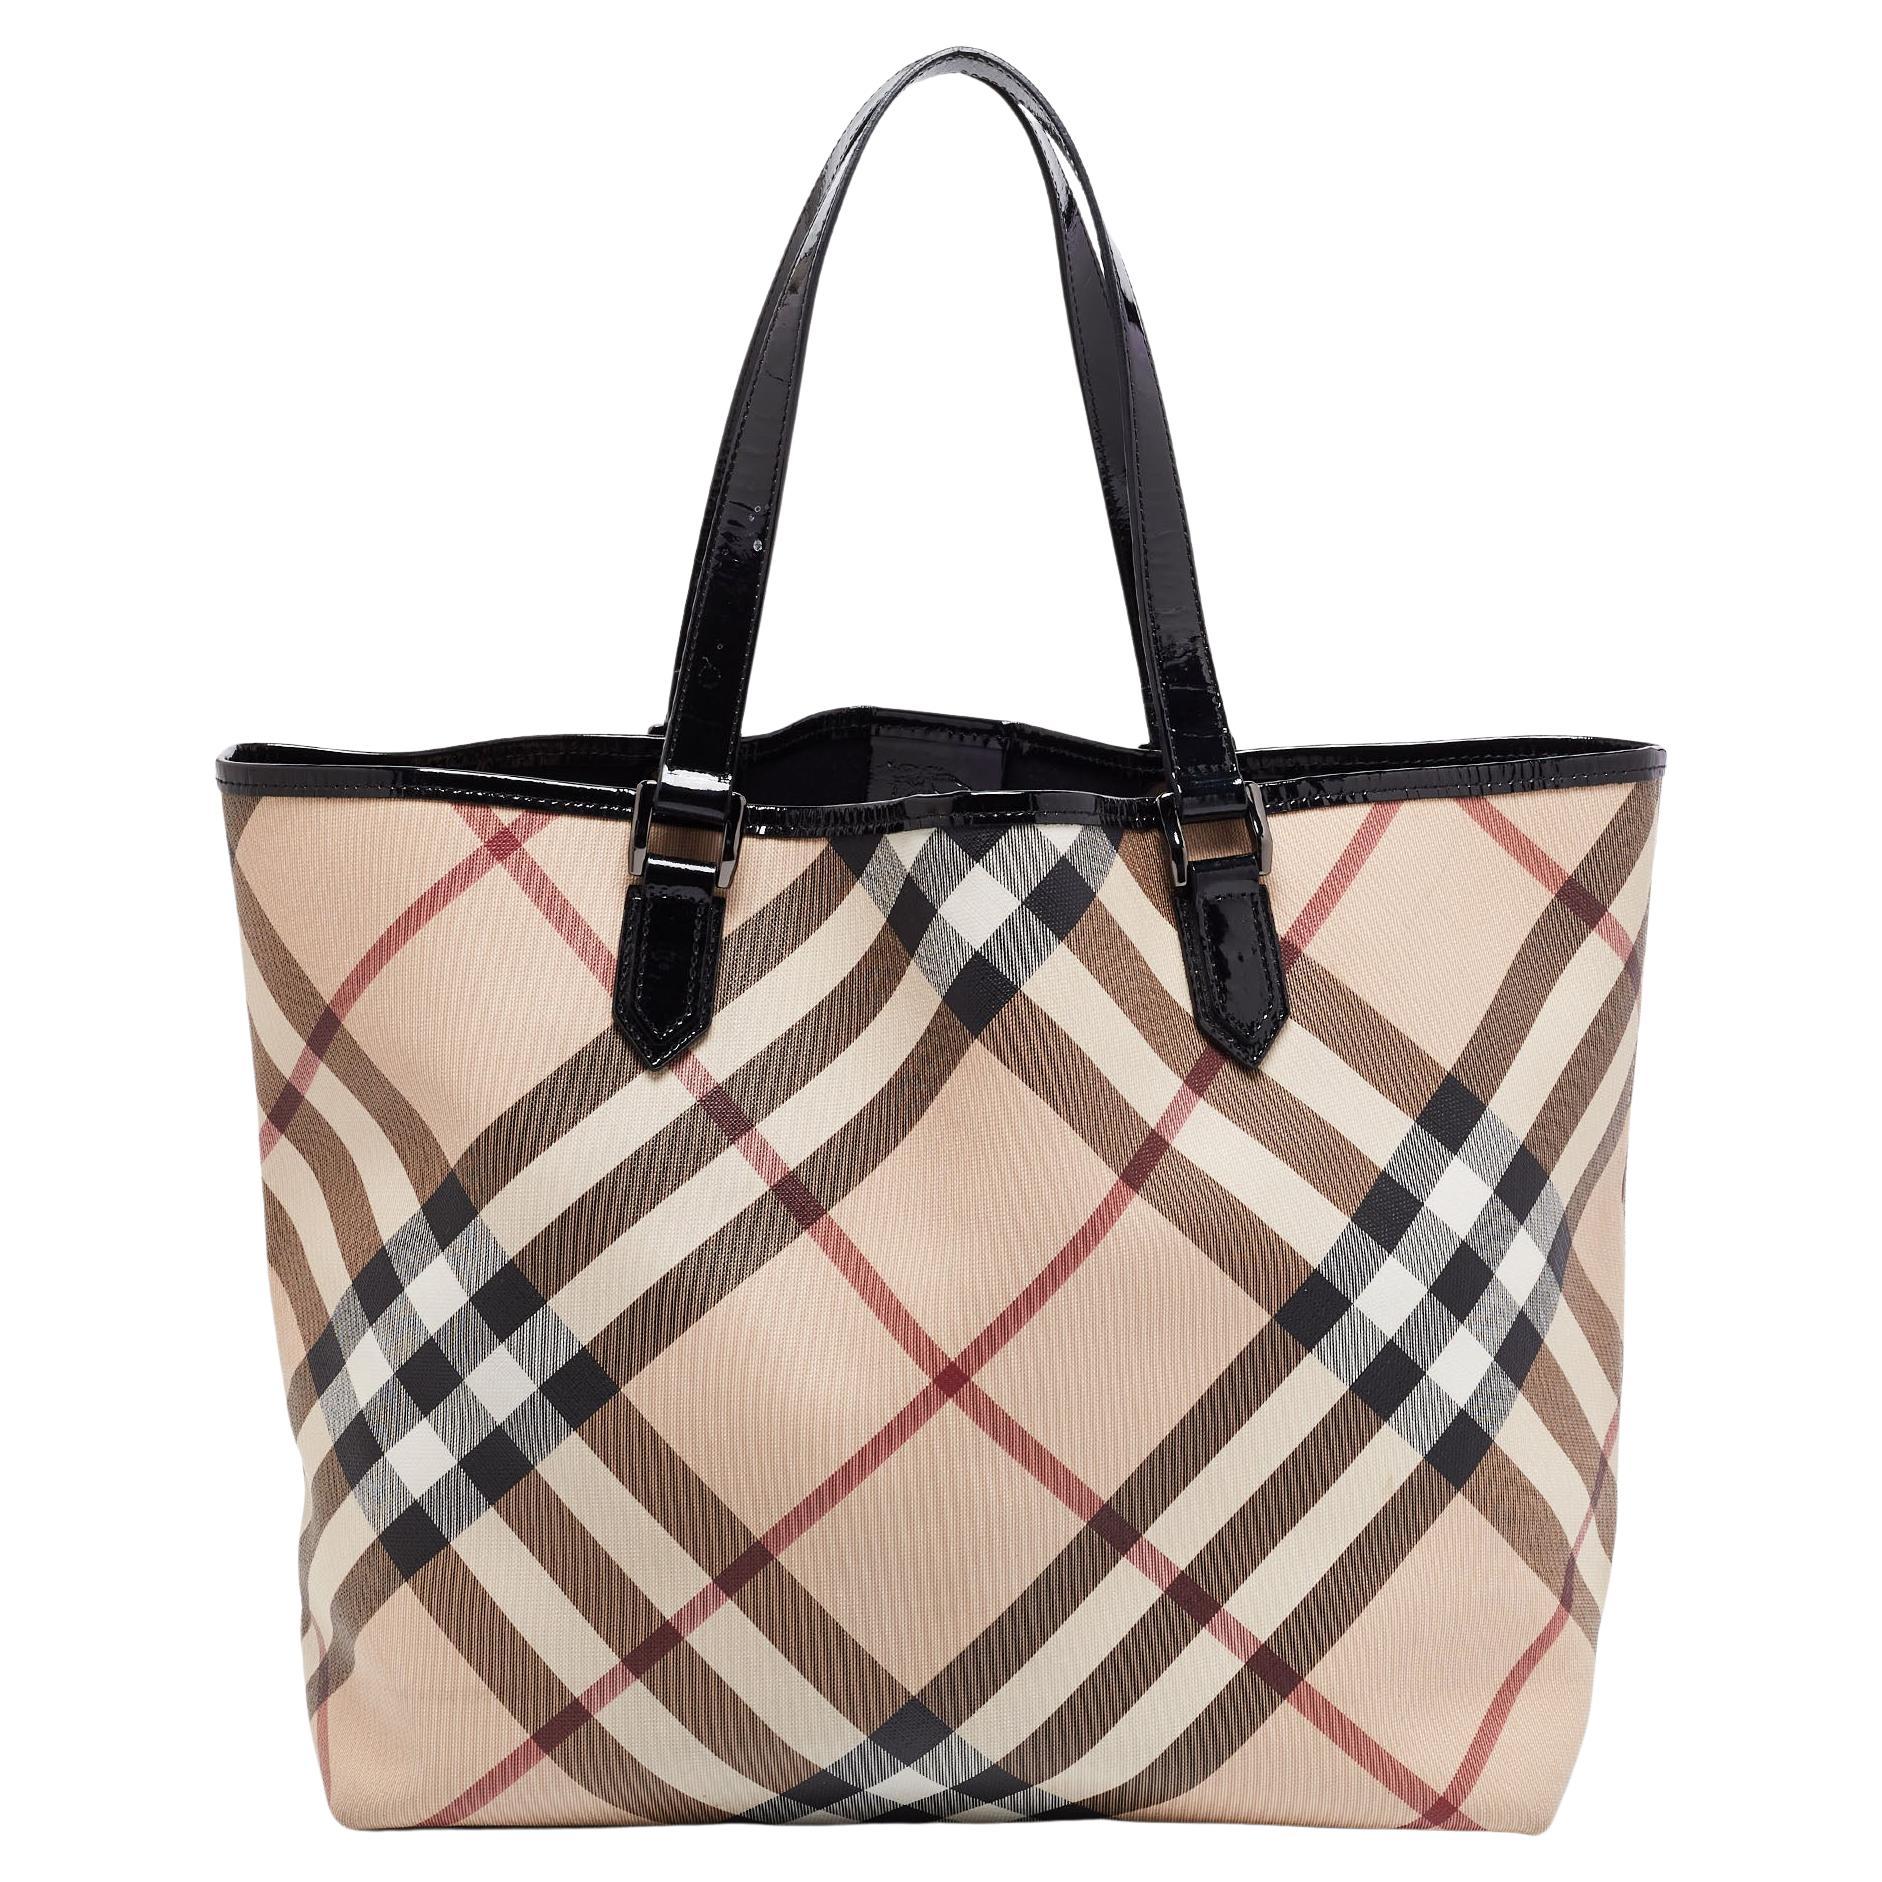 Burberry Beige/Black Supernova Check PVC and Patent Leather Nickie Tote